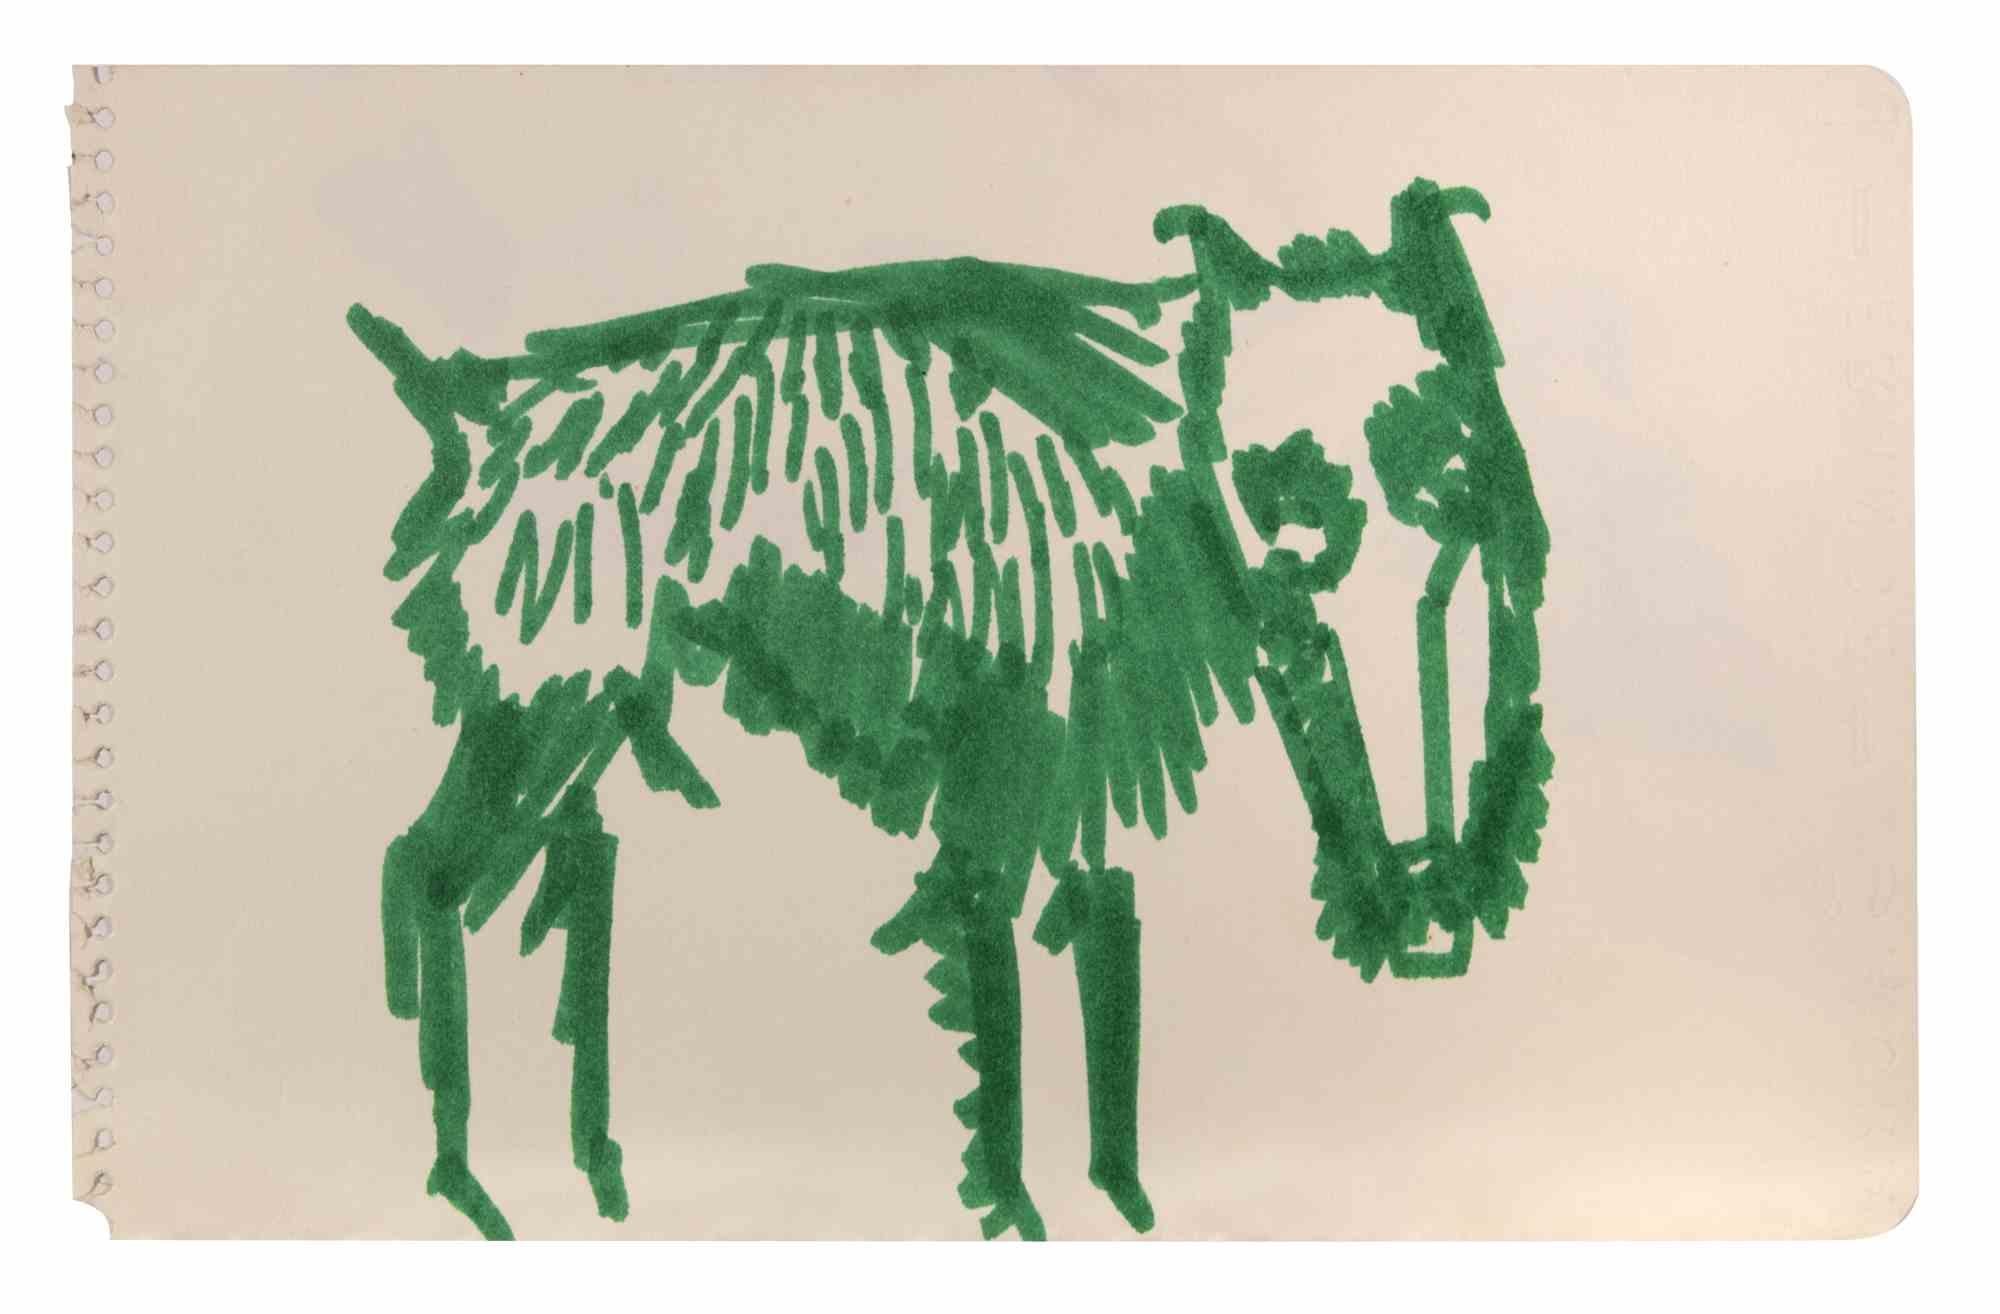 Animal is a Color Marker Drawing realized by Reynold Arnould  (Le Havre 1919 - Parigi 1980).

Good condition on a white sheet of a notebook

No Signature.

Reynold Arnould was born in Le Havre, France in 1919. He studied at l'École des Beaux-Arts de